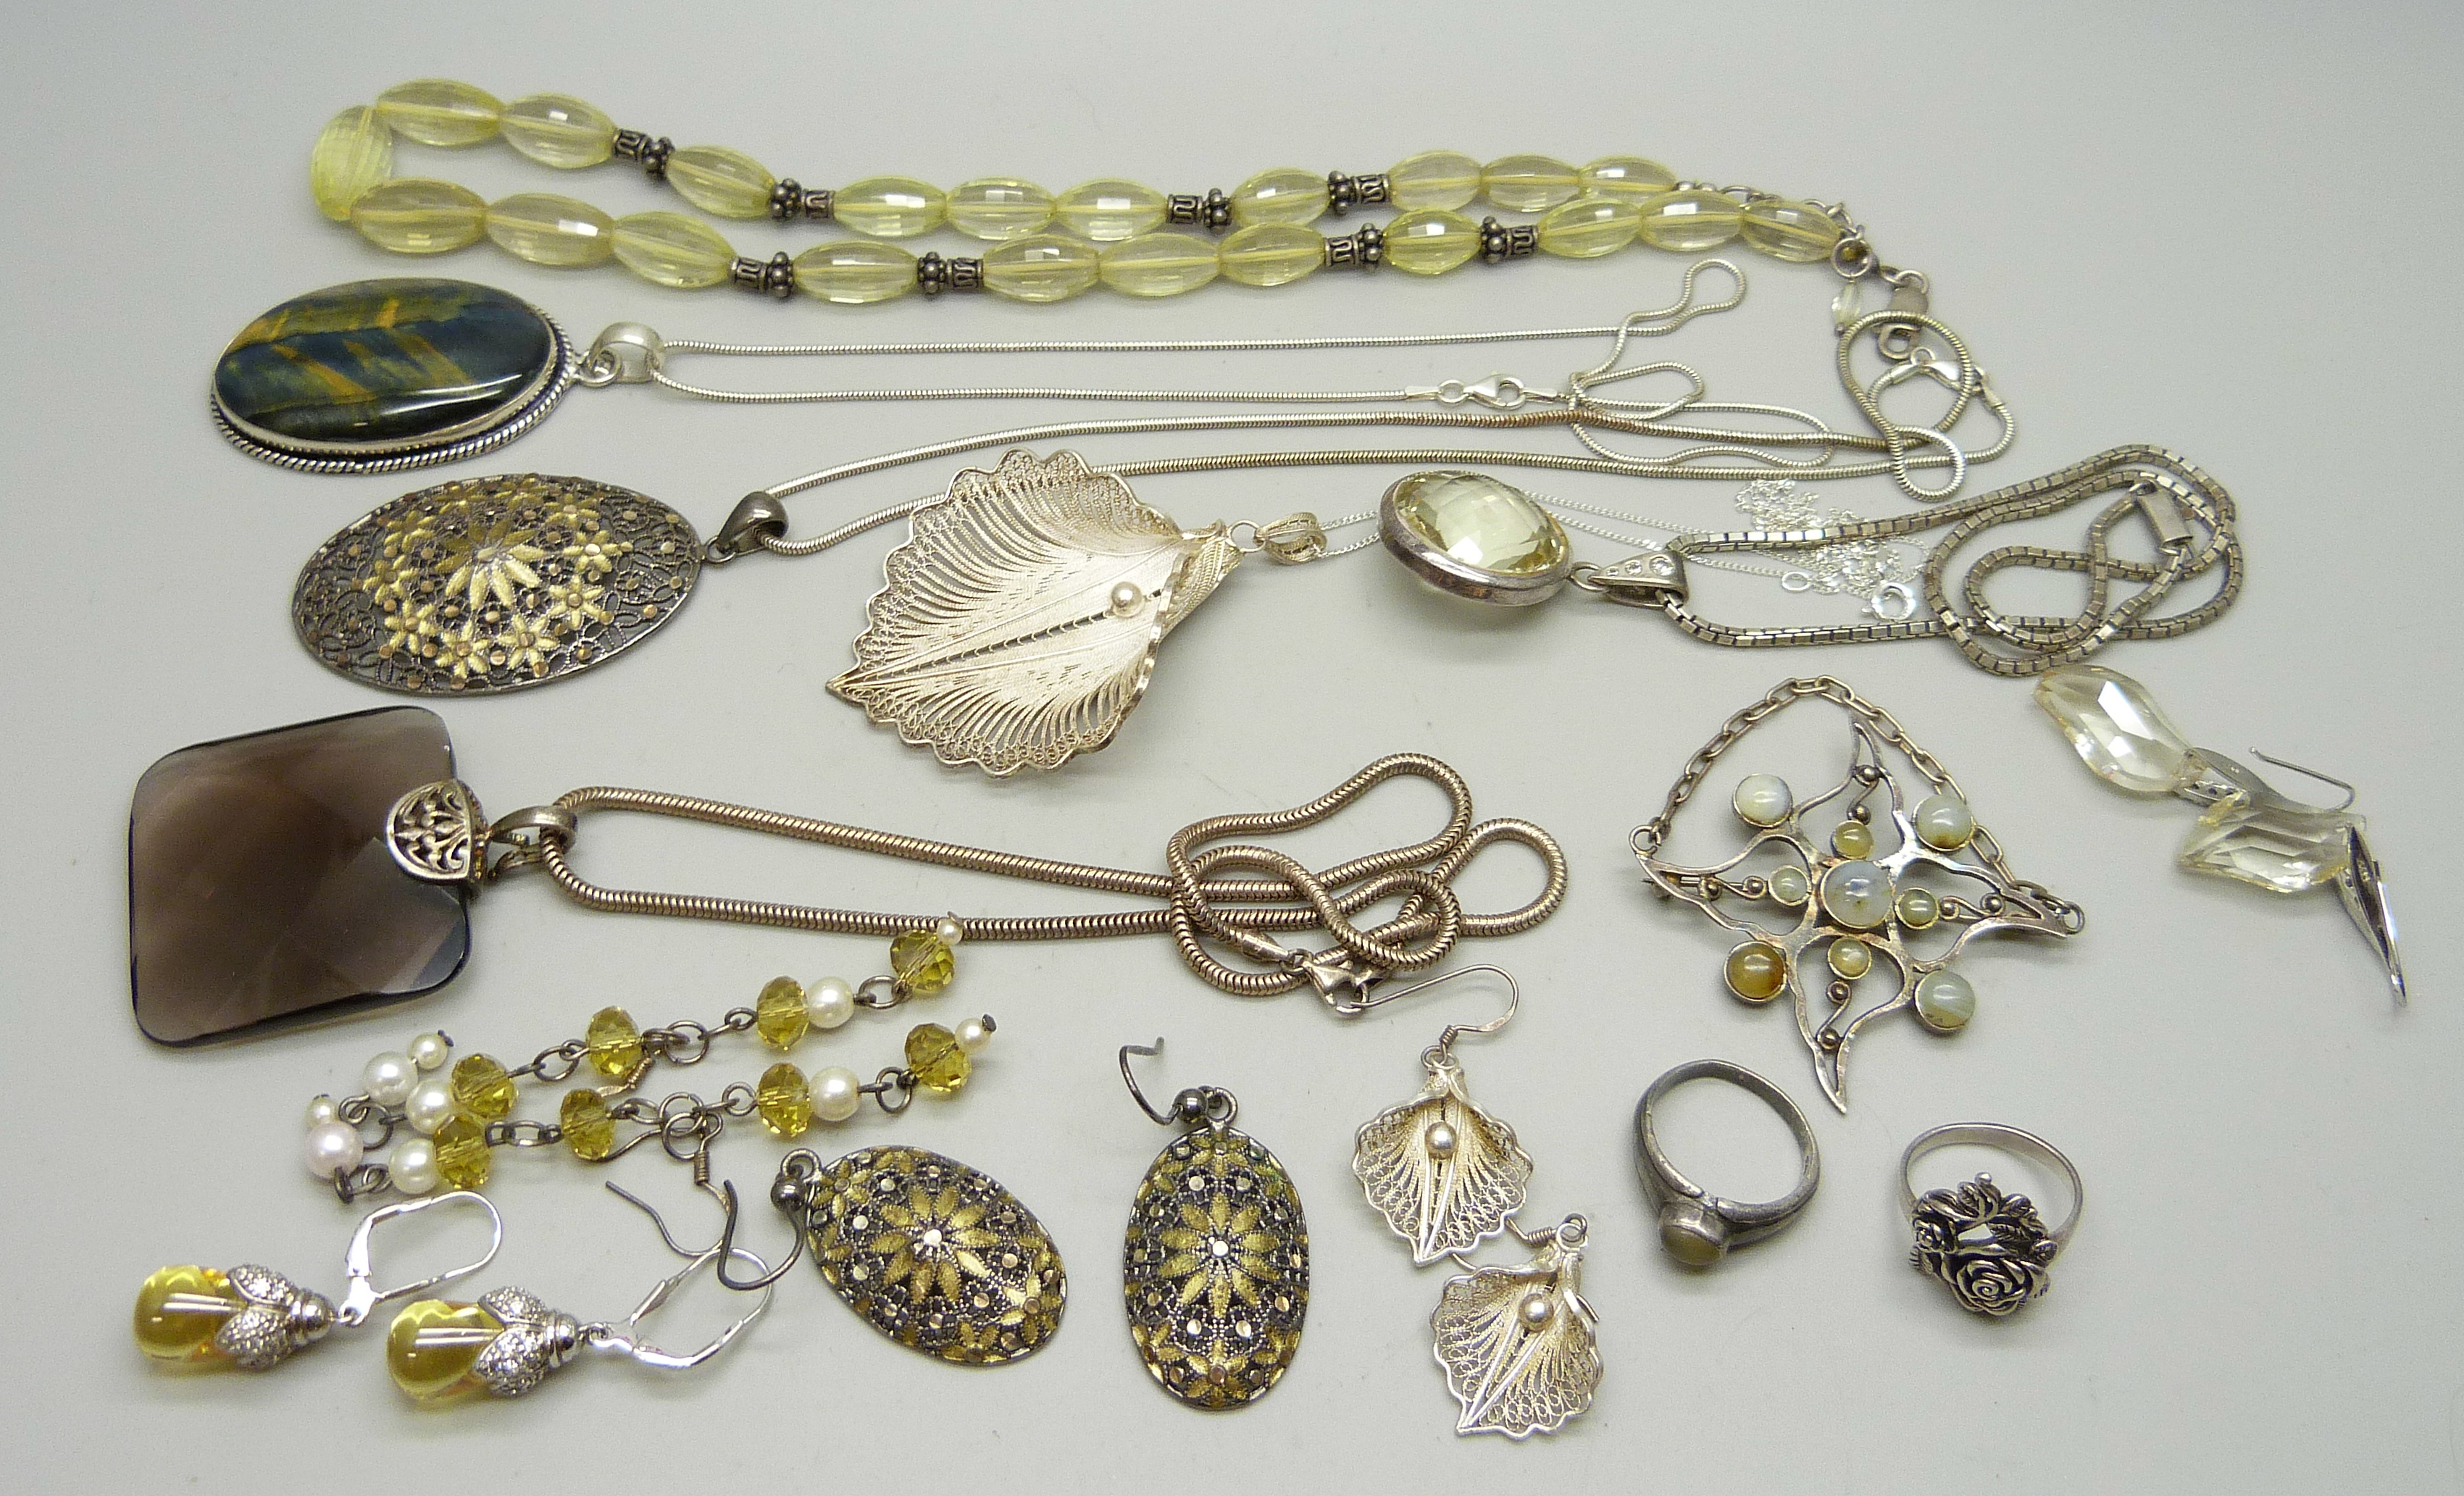 A collection of silver jewellery including two filigree pendants, a citrine bead necklace and